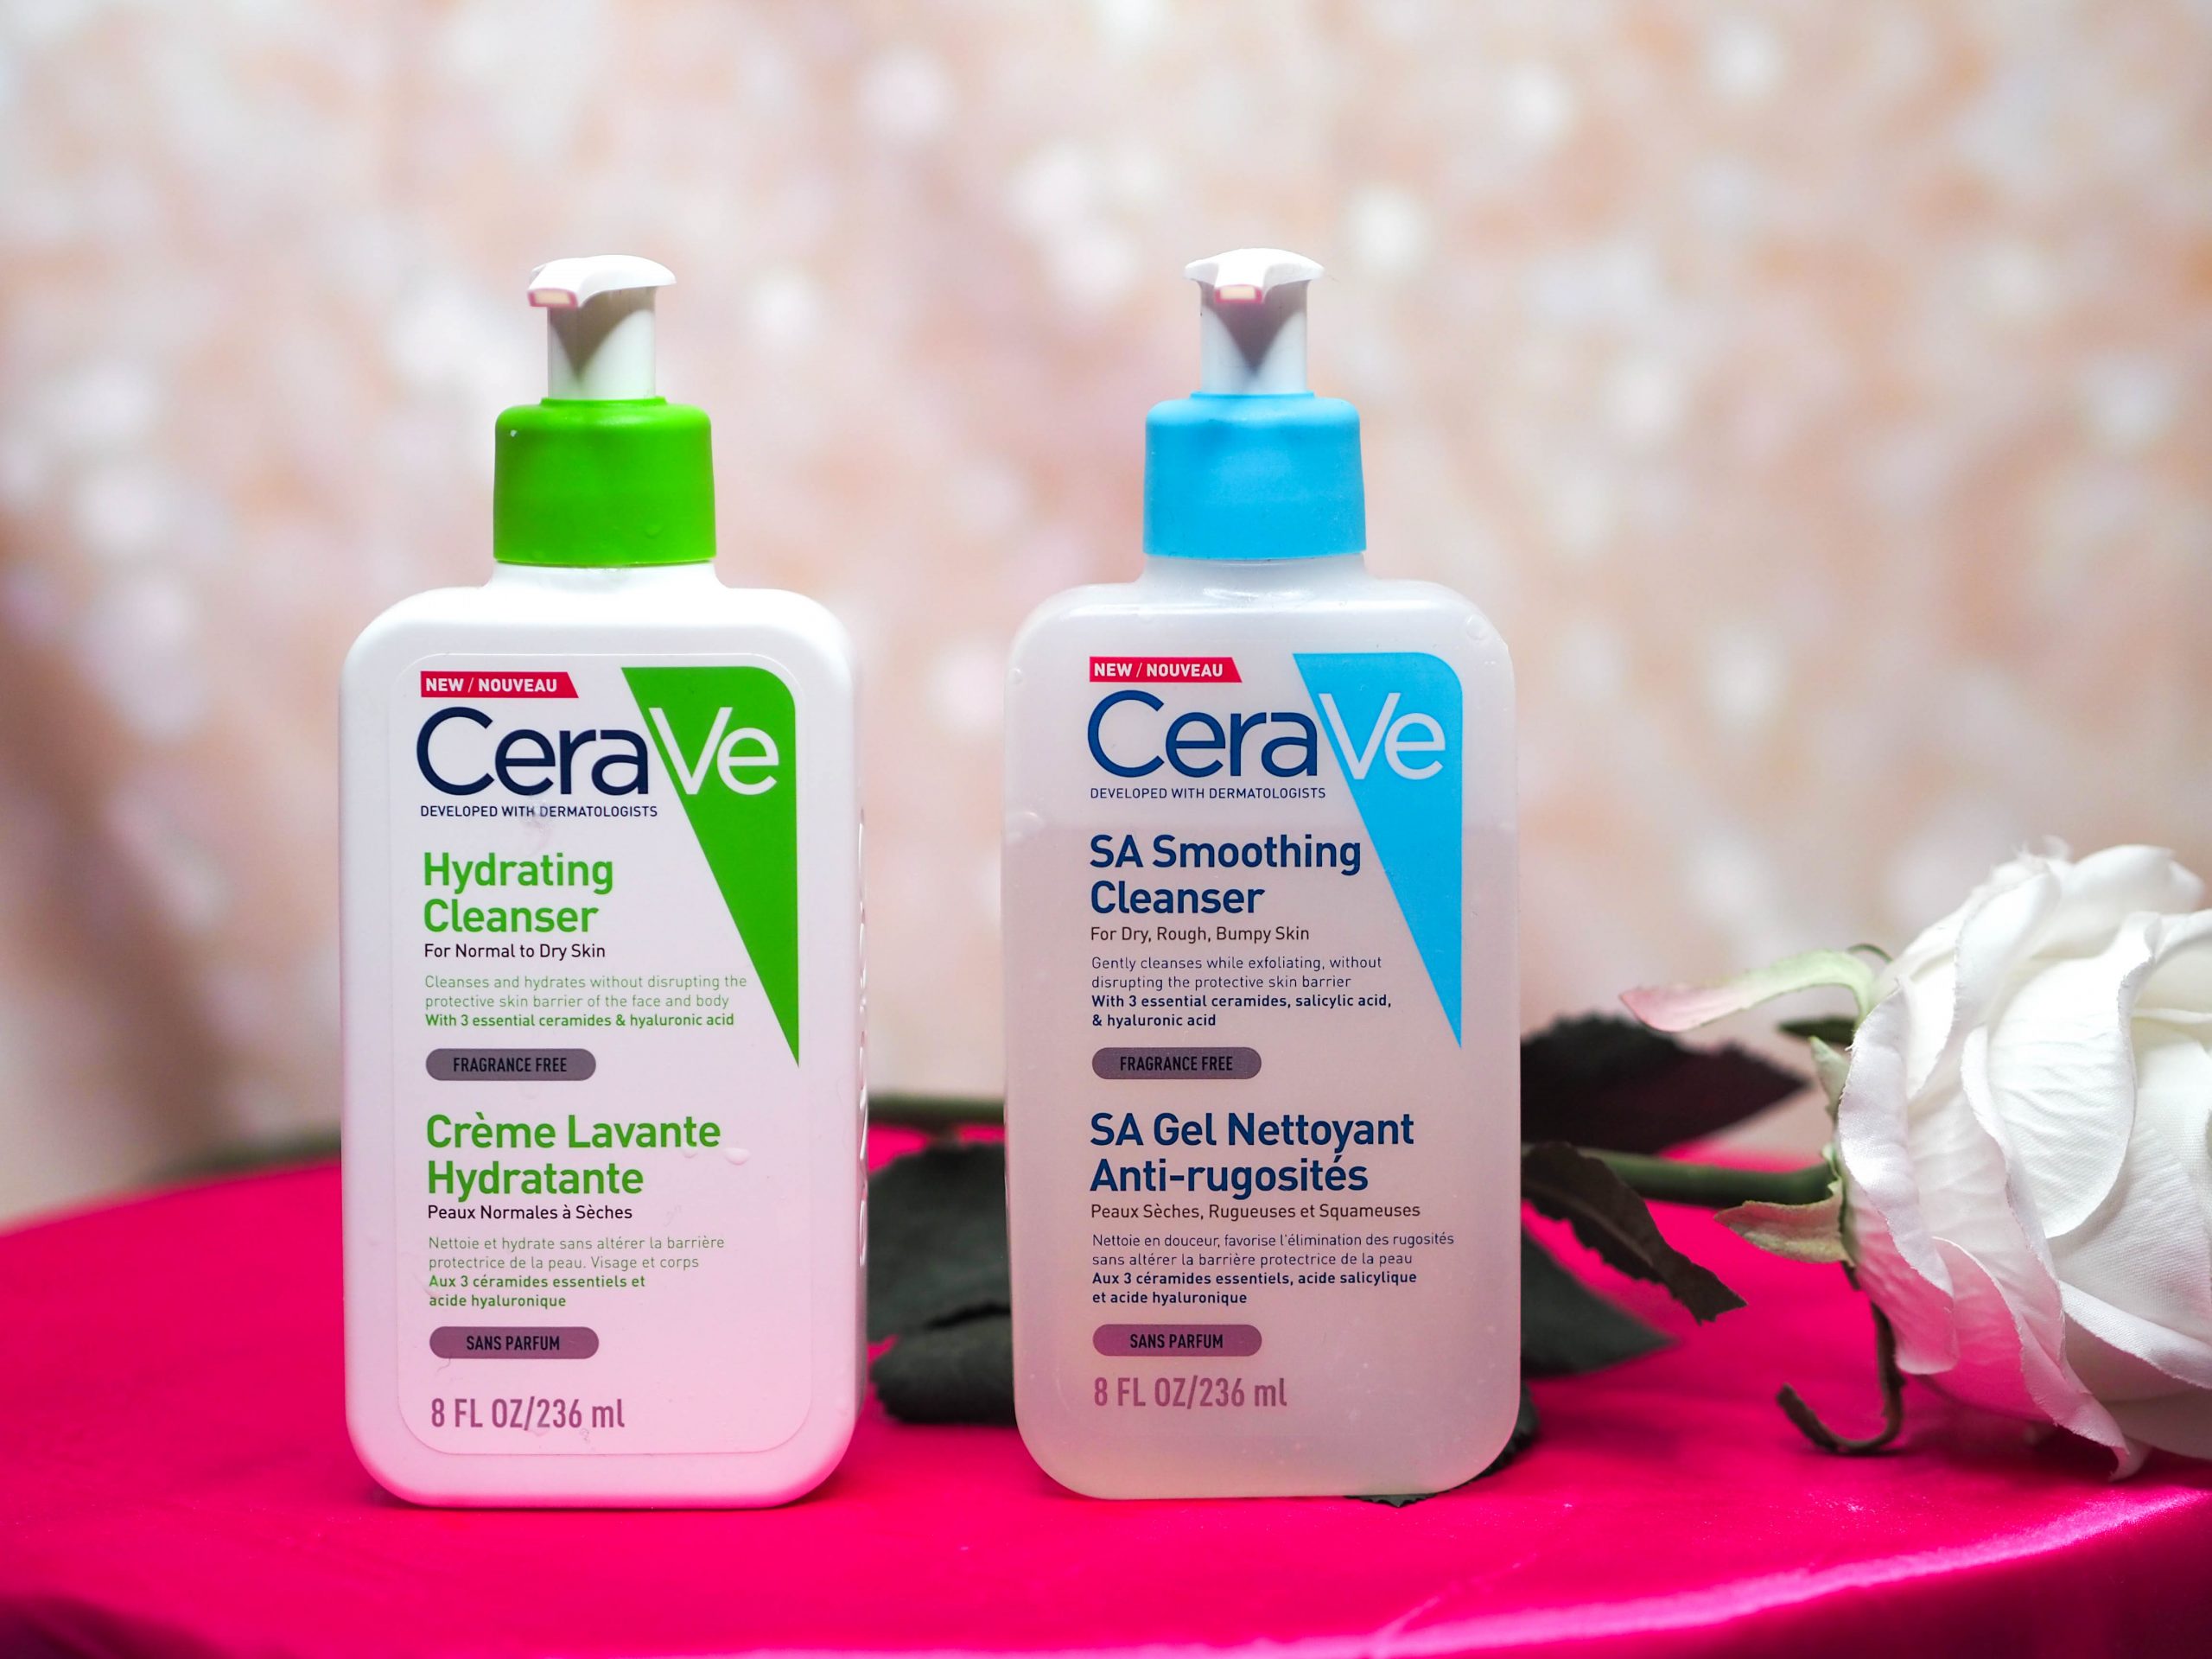 cerave-hydrating-cleanser-and-cerave-sa-smoothing-cleanser-review